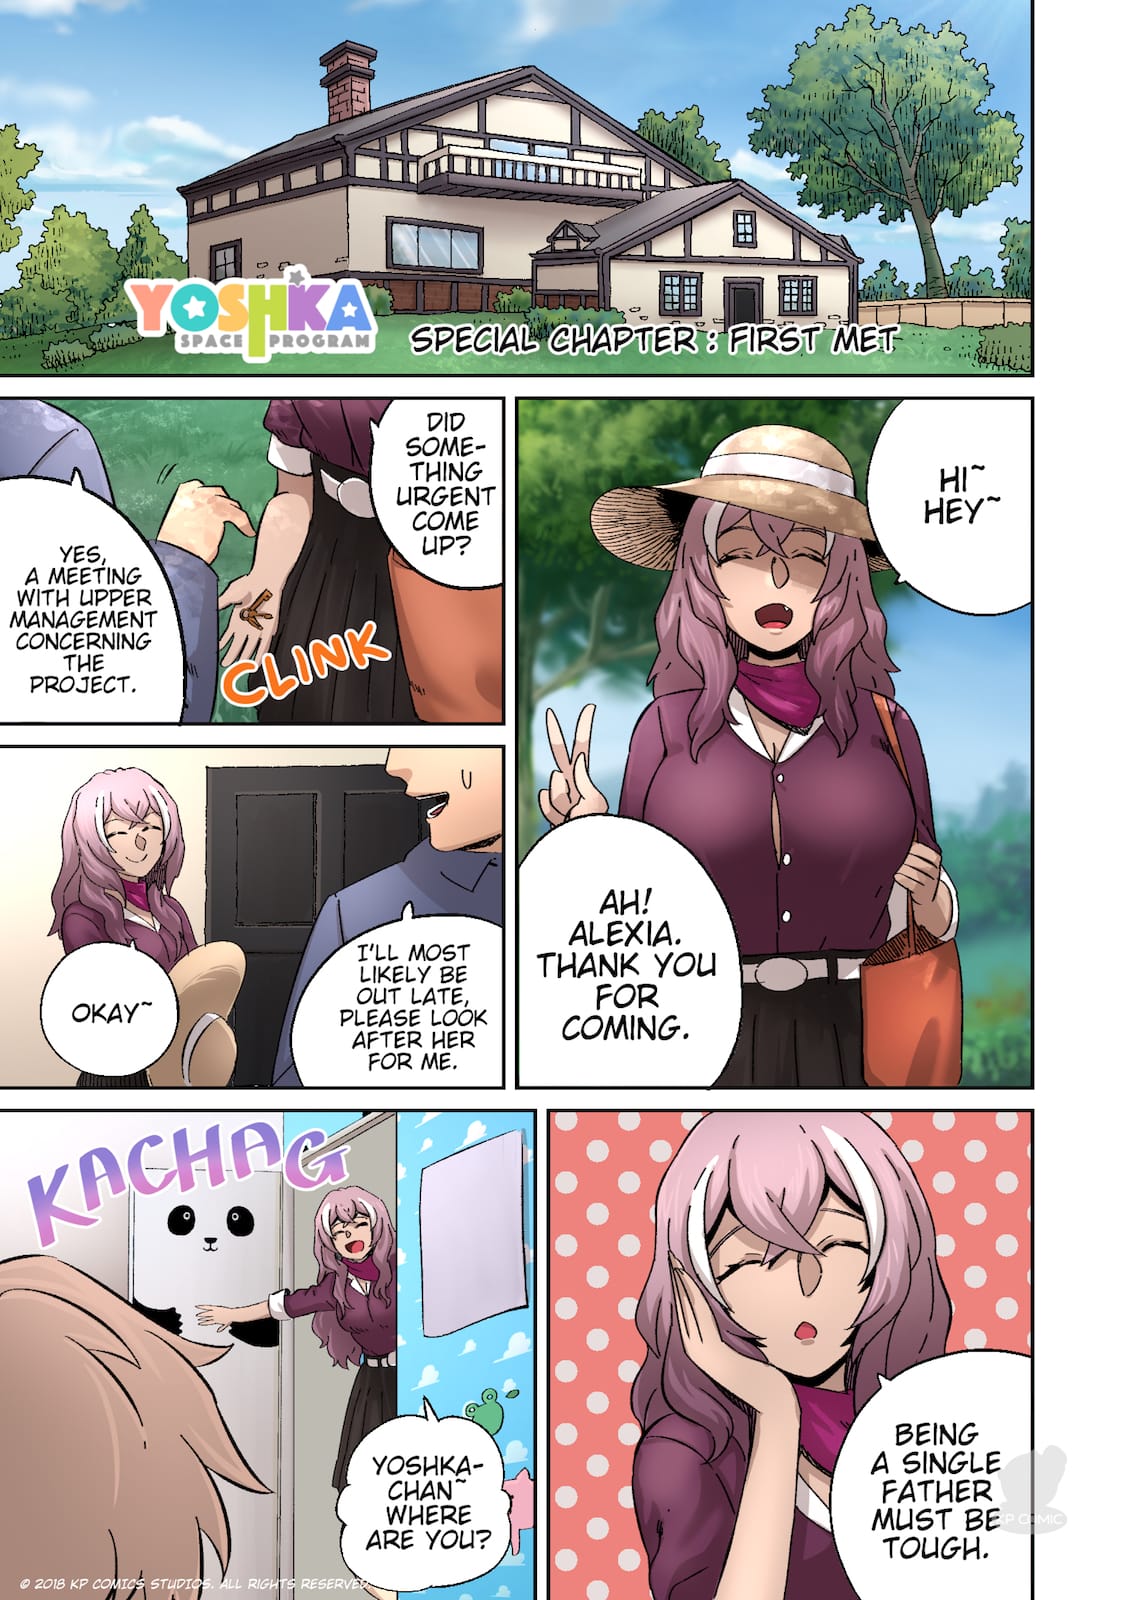 Yoshka Space Program Ch. 22.5 Special Chapter